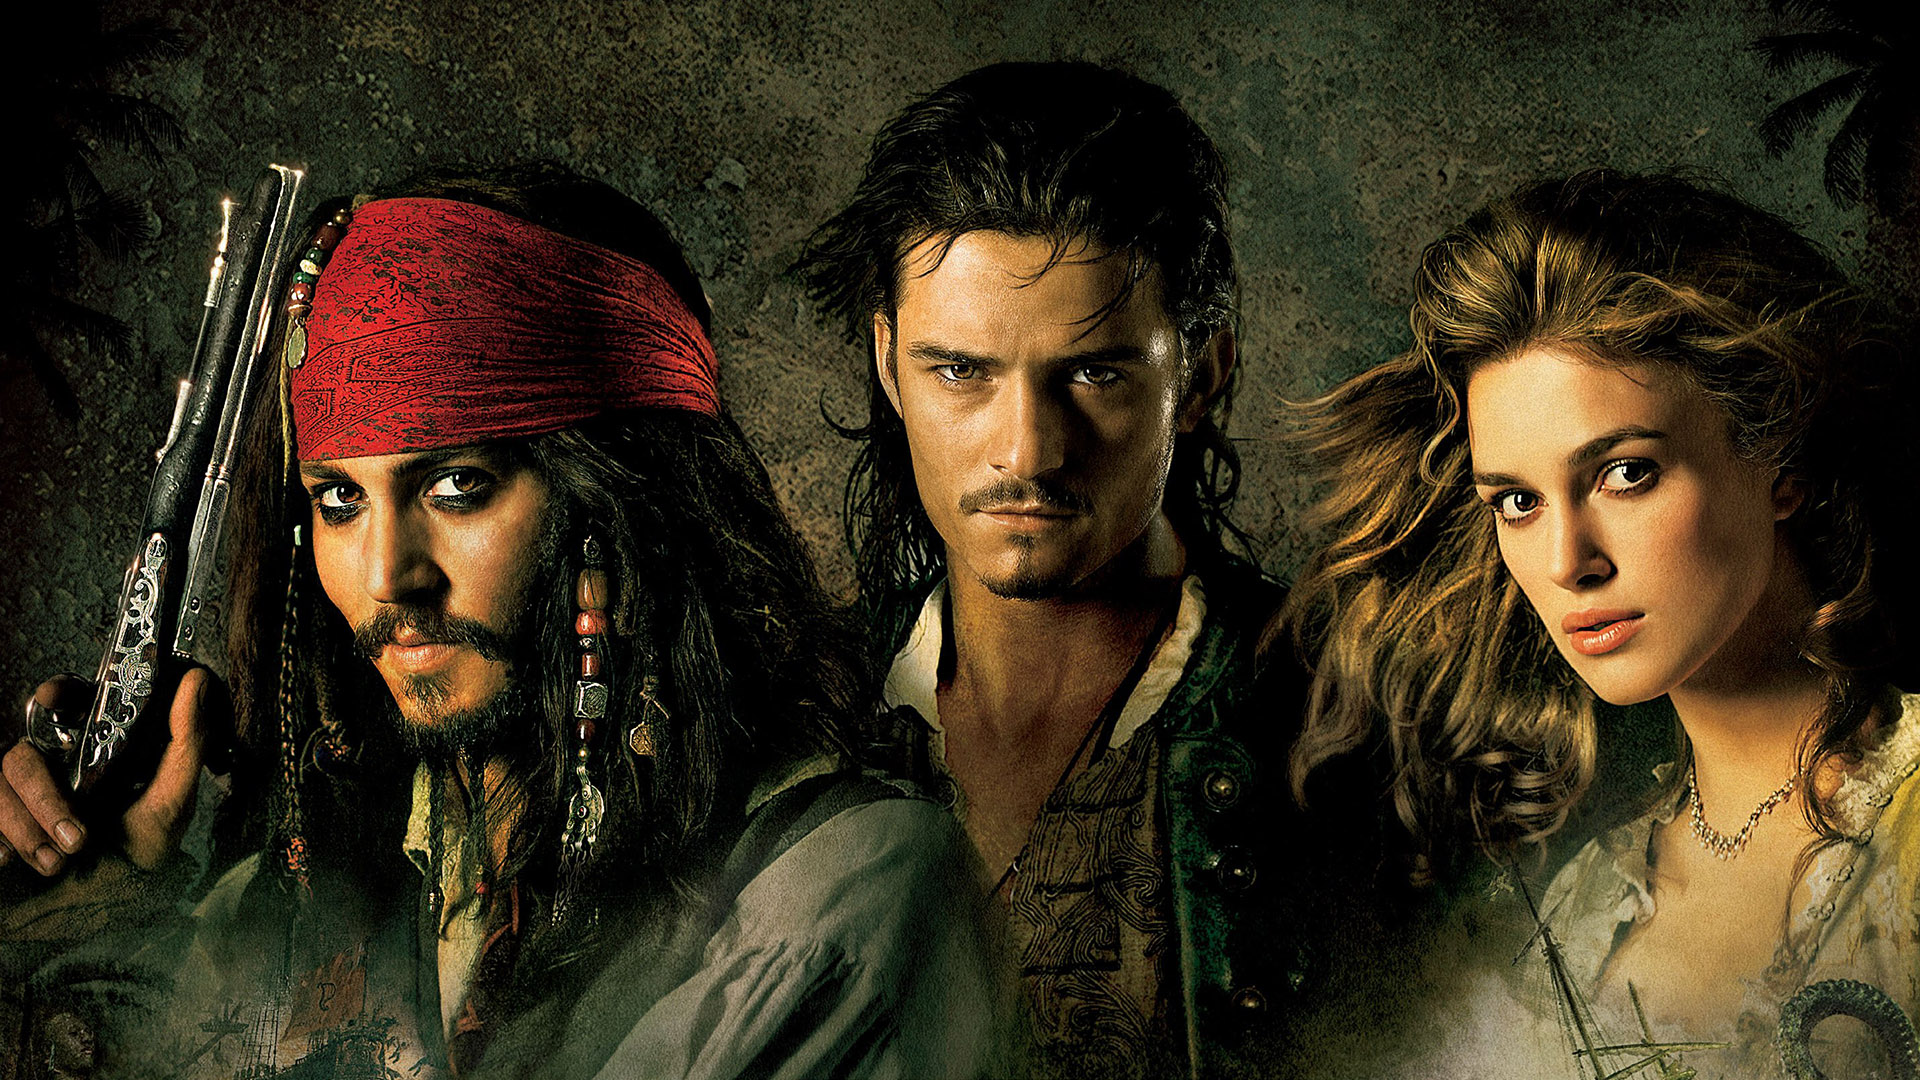 High Resolution Wallpaper | Pirates Of The Caribbean: Dead Man's Chest 1920x1080 px